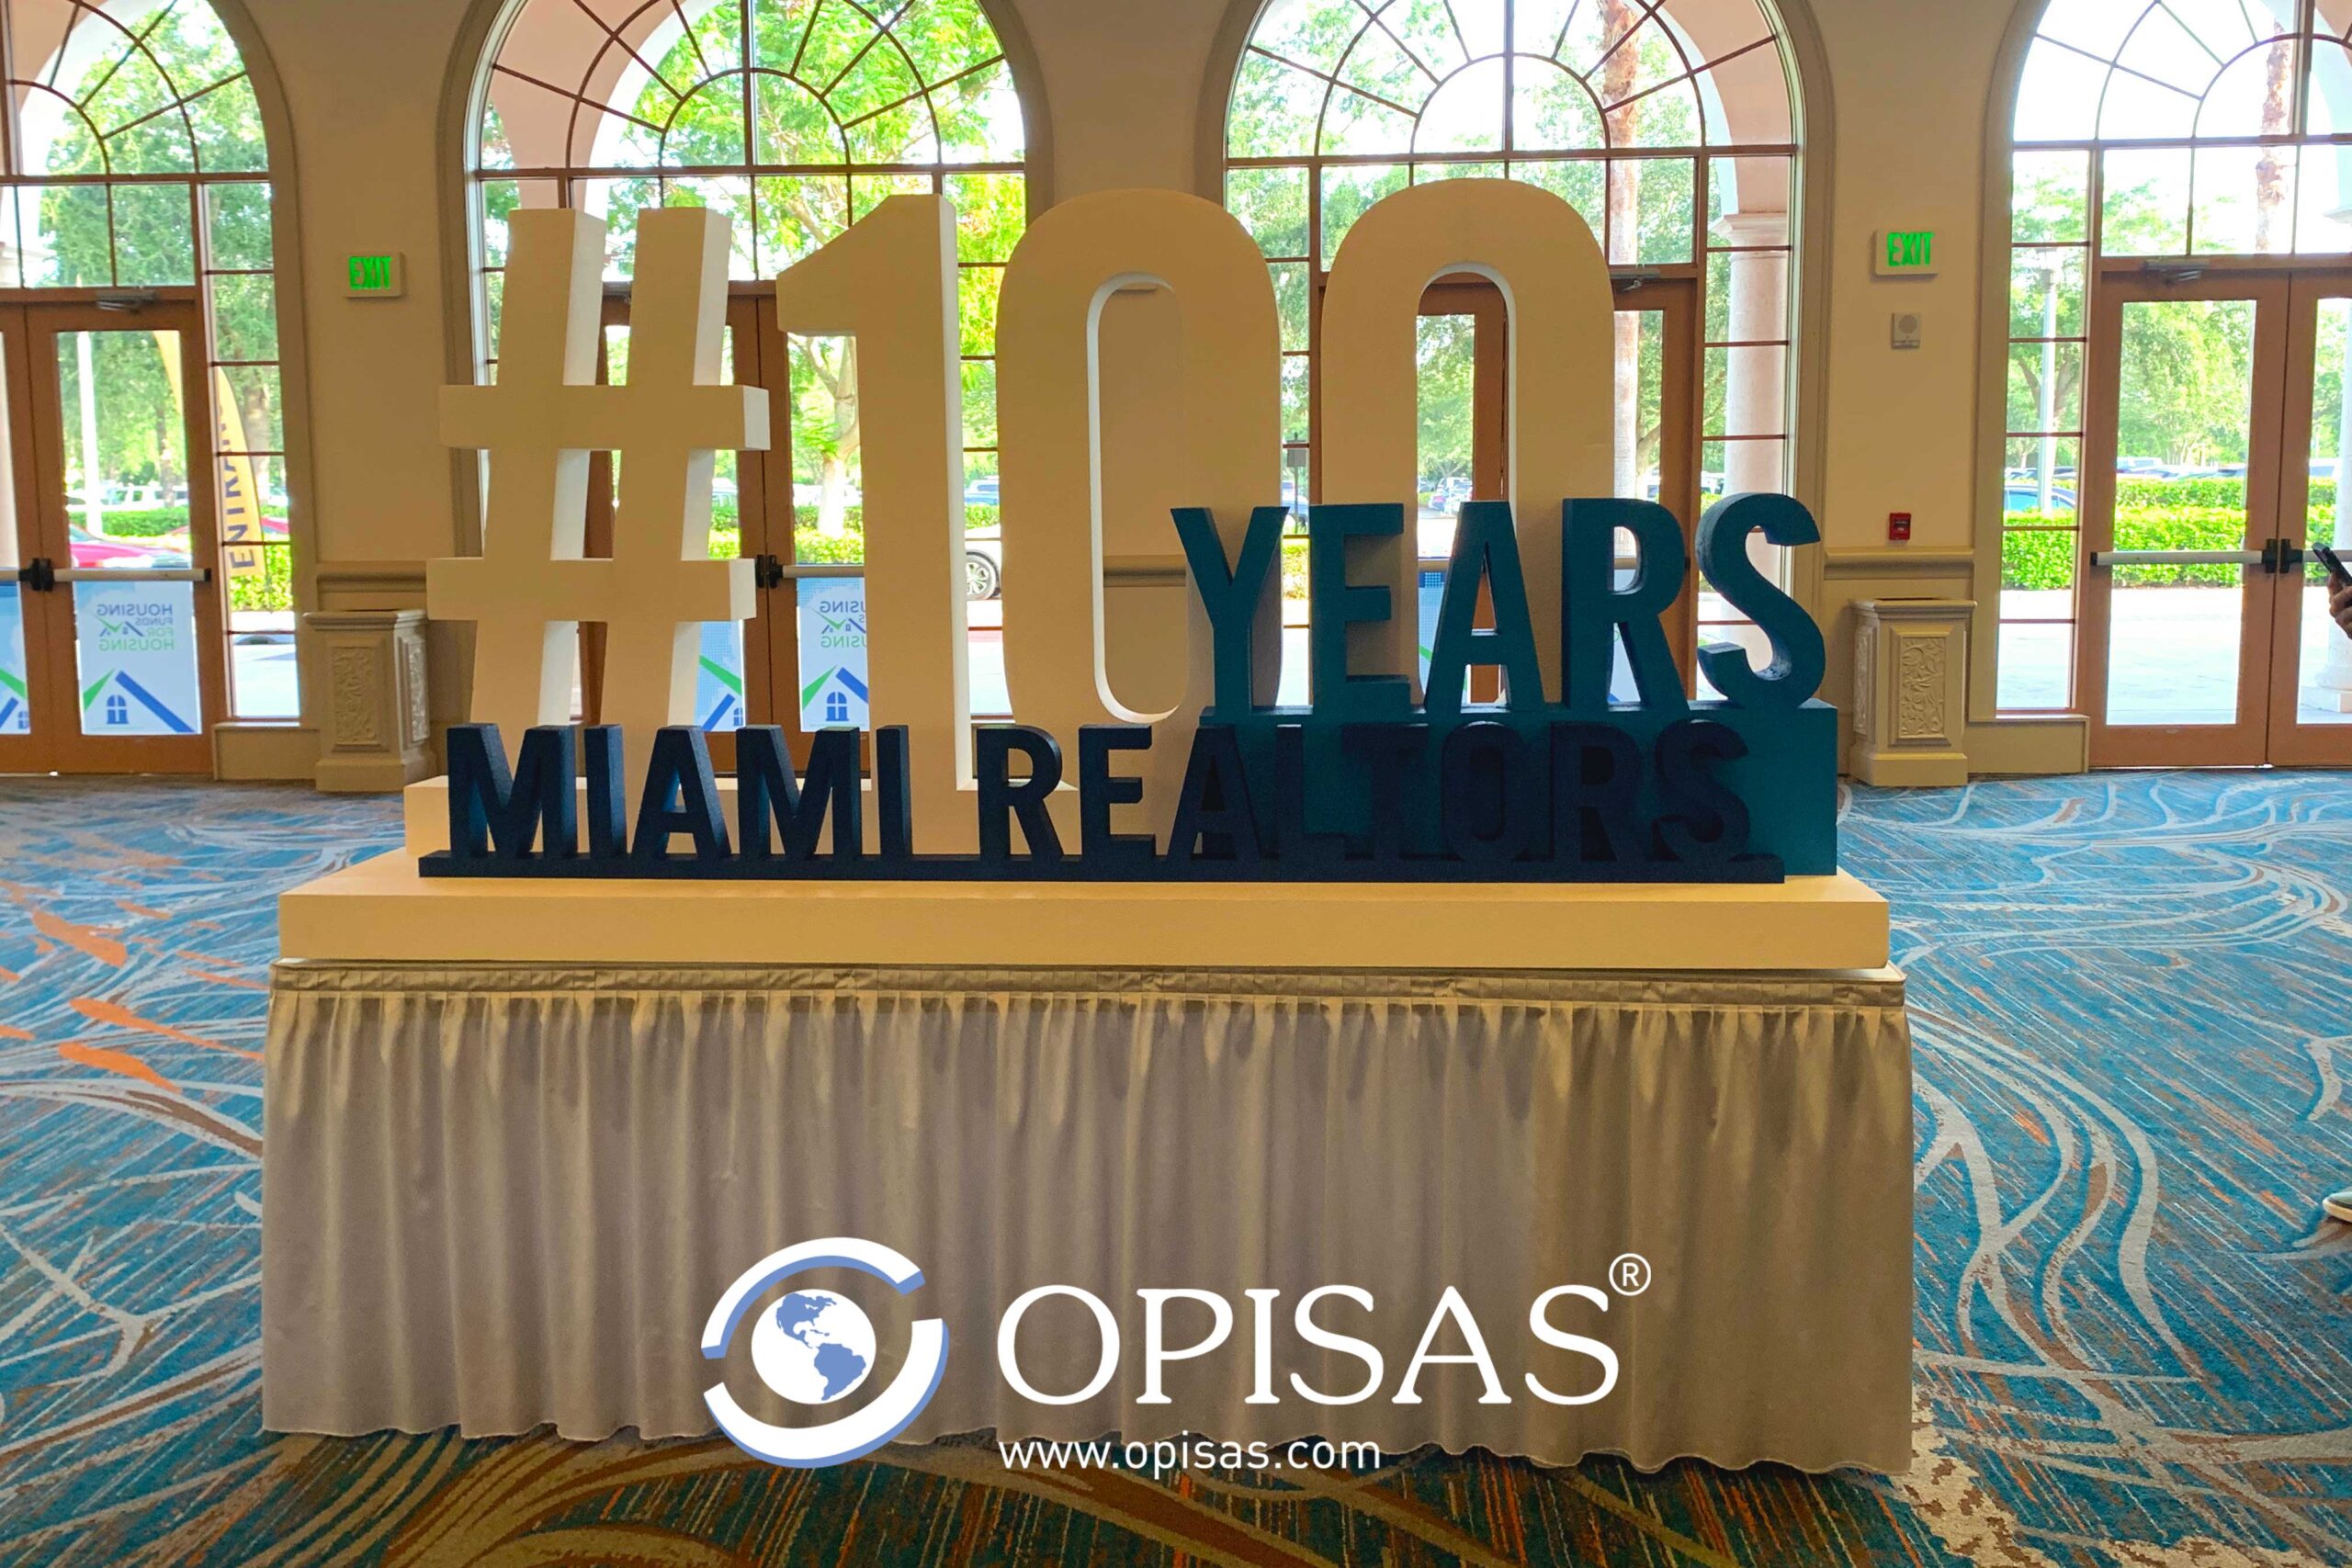 OPISAS attends the Florida Realtors Convention & Trade EXPO OPISAS